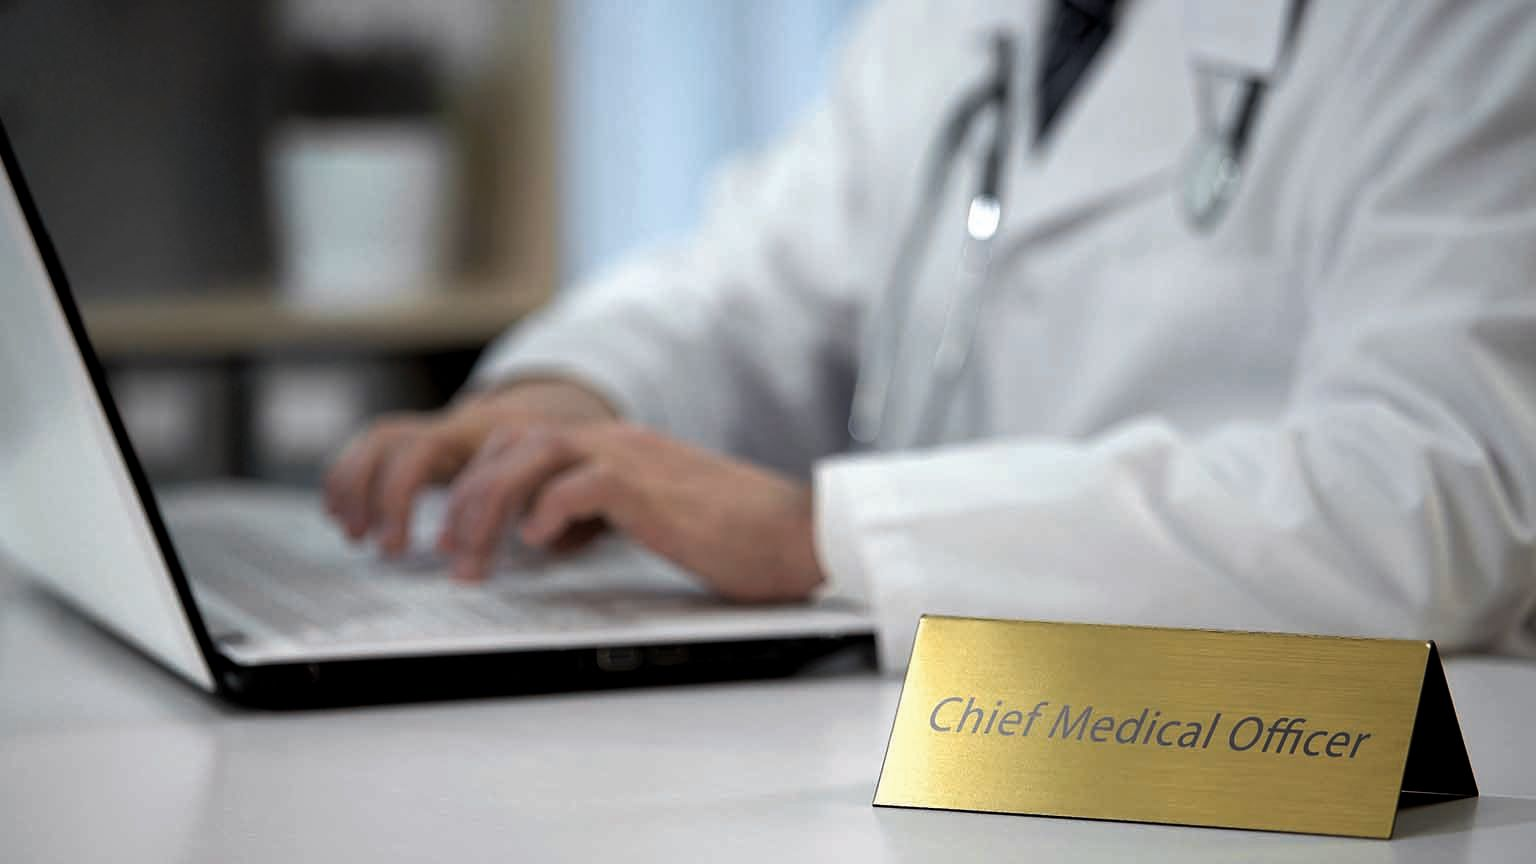 The position of CMO (Chief Medical Officer) or Clinical Director is important 